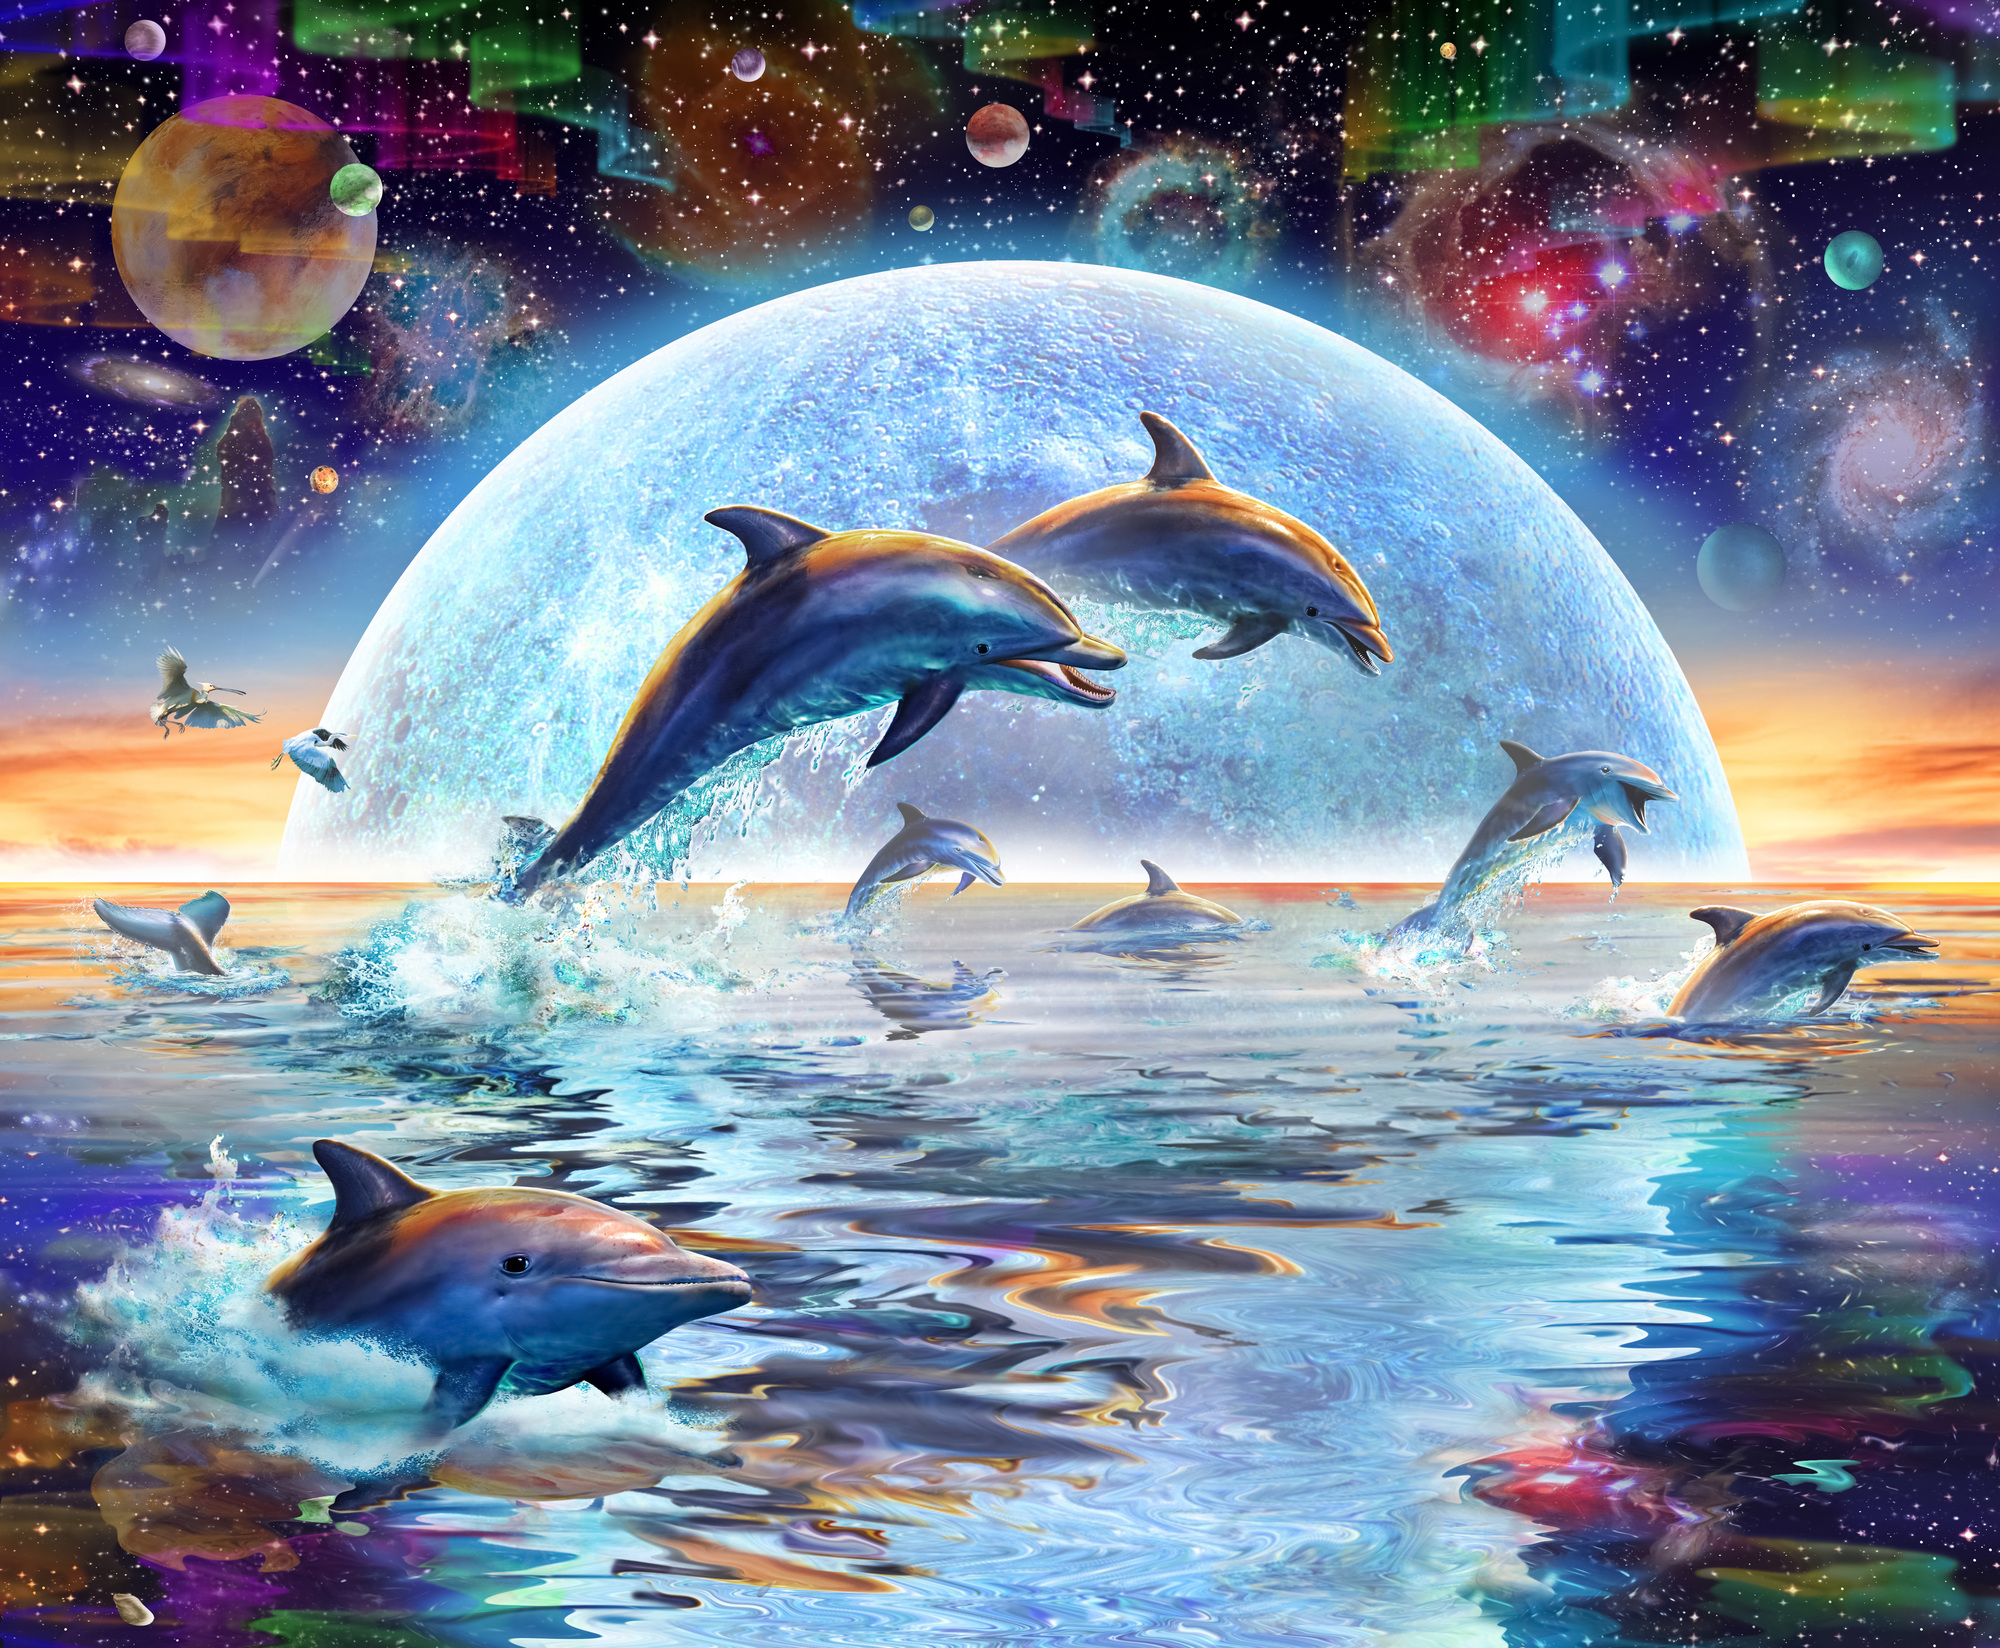 dolphins-by-moonlight-wall-mural-dolphins-by-moonlight-wallpaper